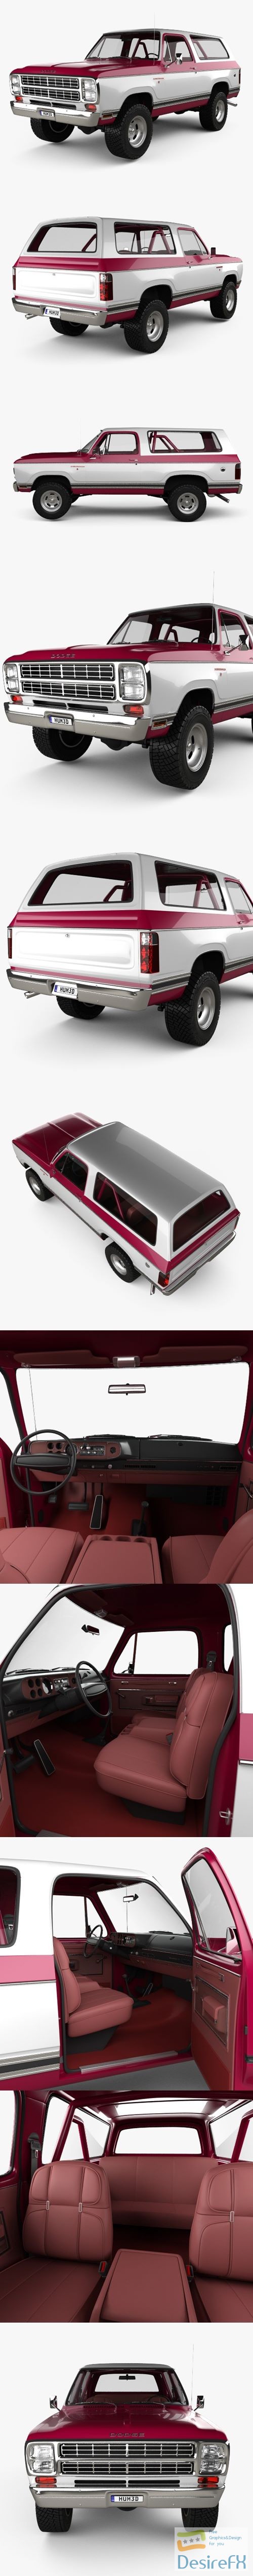 Dodge Ramcharger with HQ interior 1979 3D Model